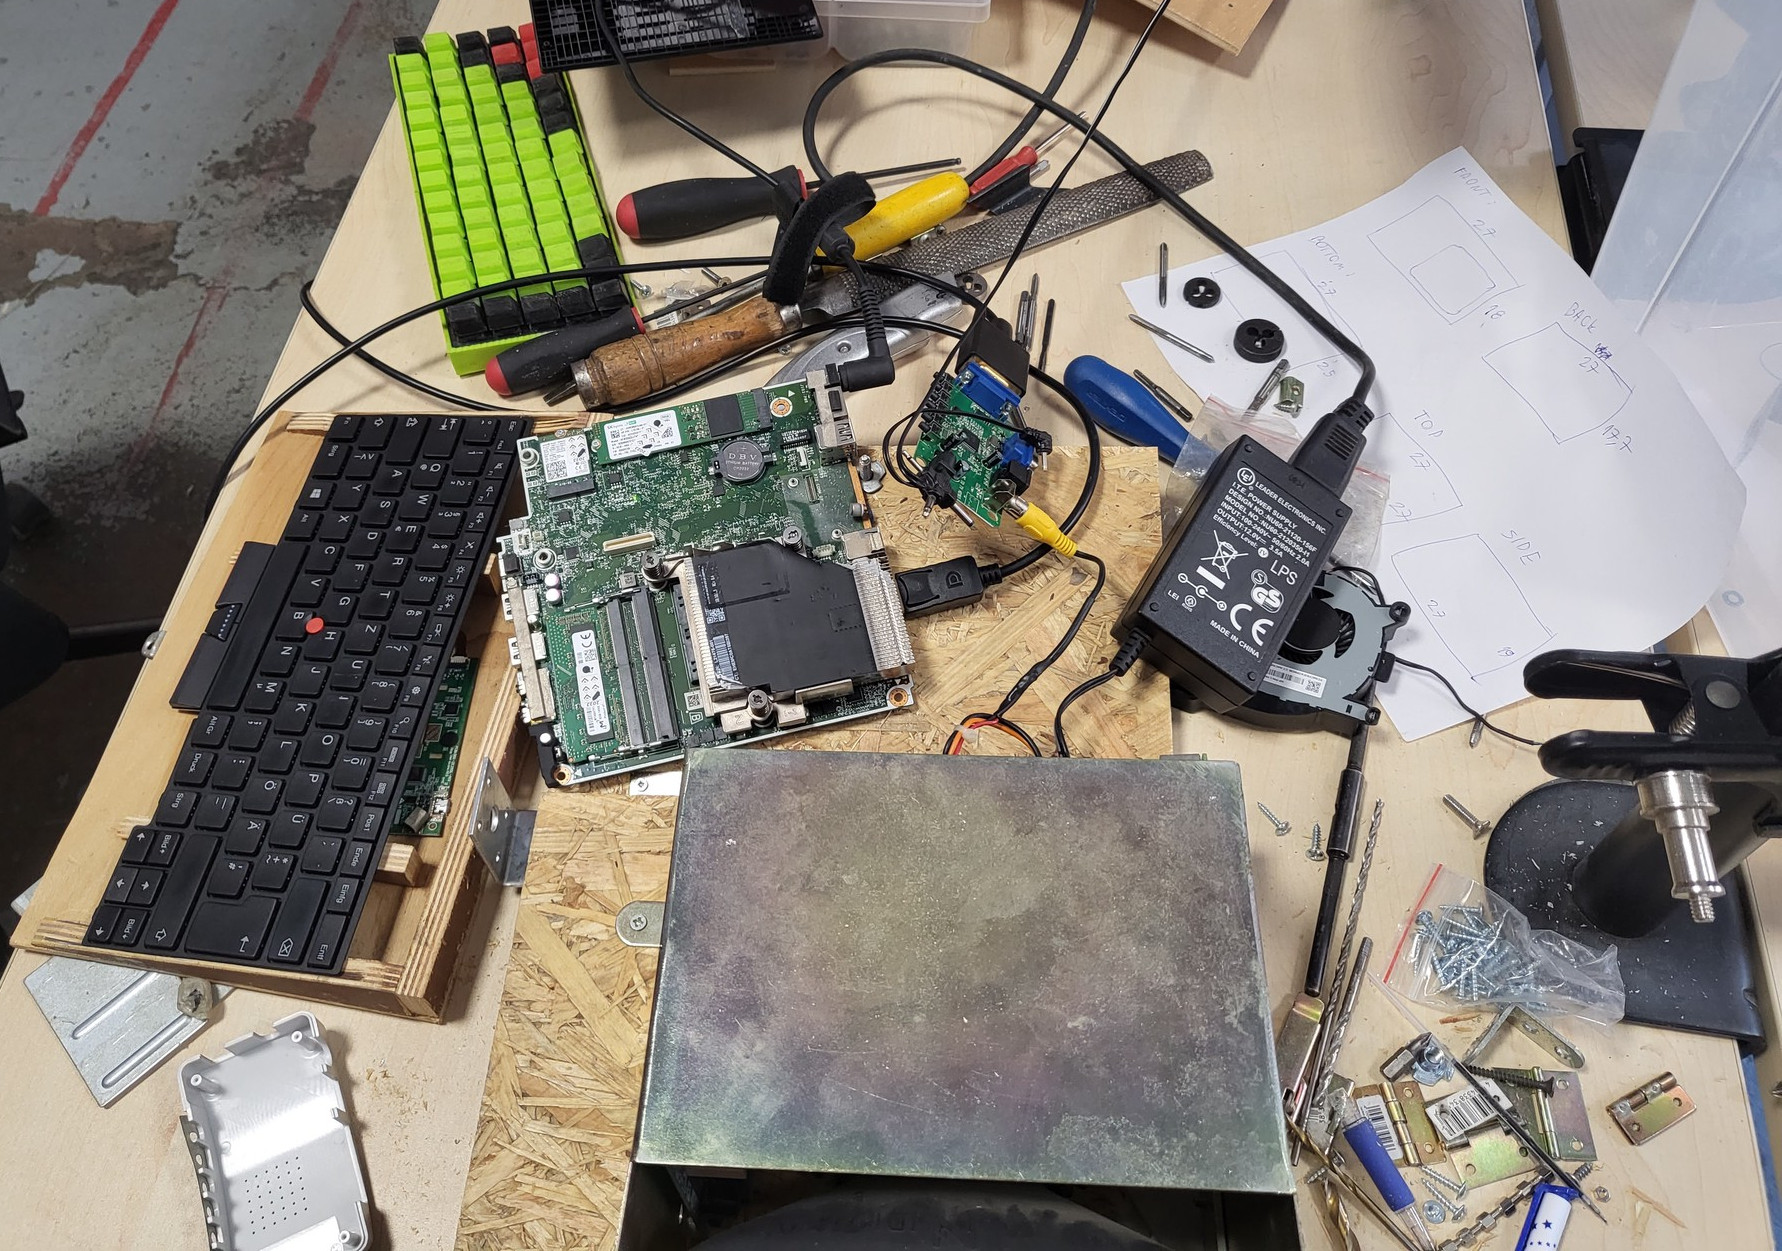 Picture of a desk with a ton of parts laying around, vaguely connected together. There's a keyboard on the left, next to it is a motherboard, next to that is a converter board from VGA to composite. You can also see a part of the display, next to a pile of hinges and brackets.